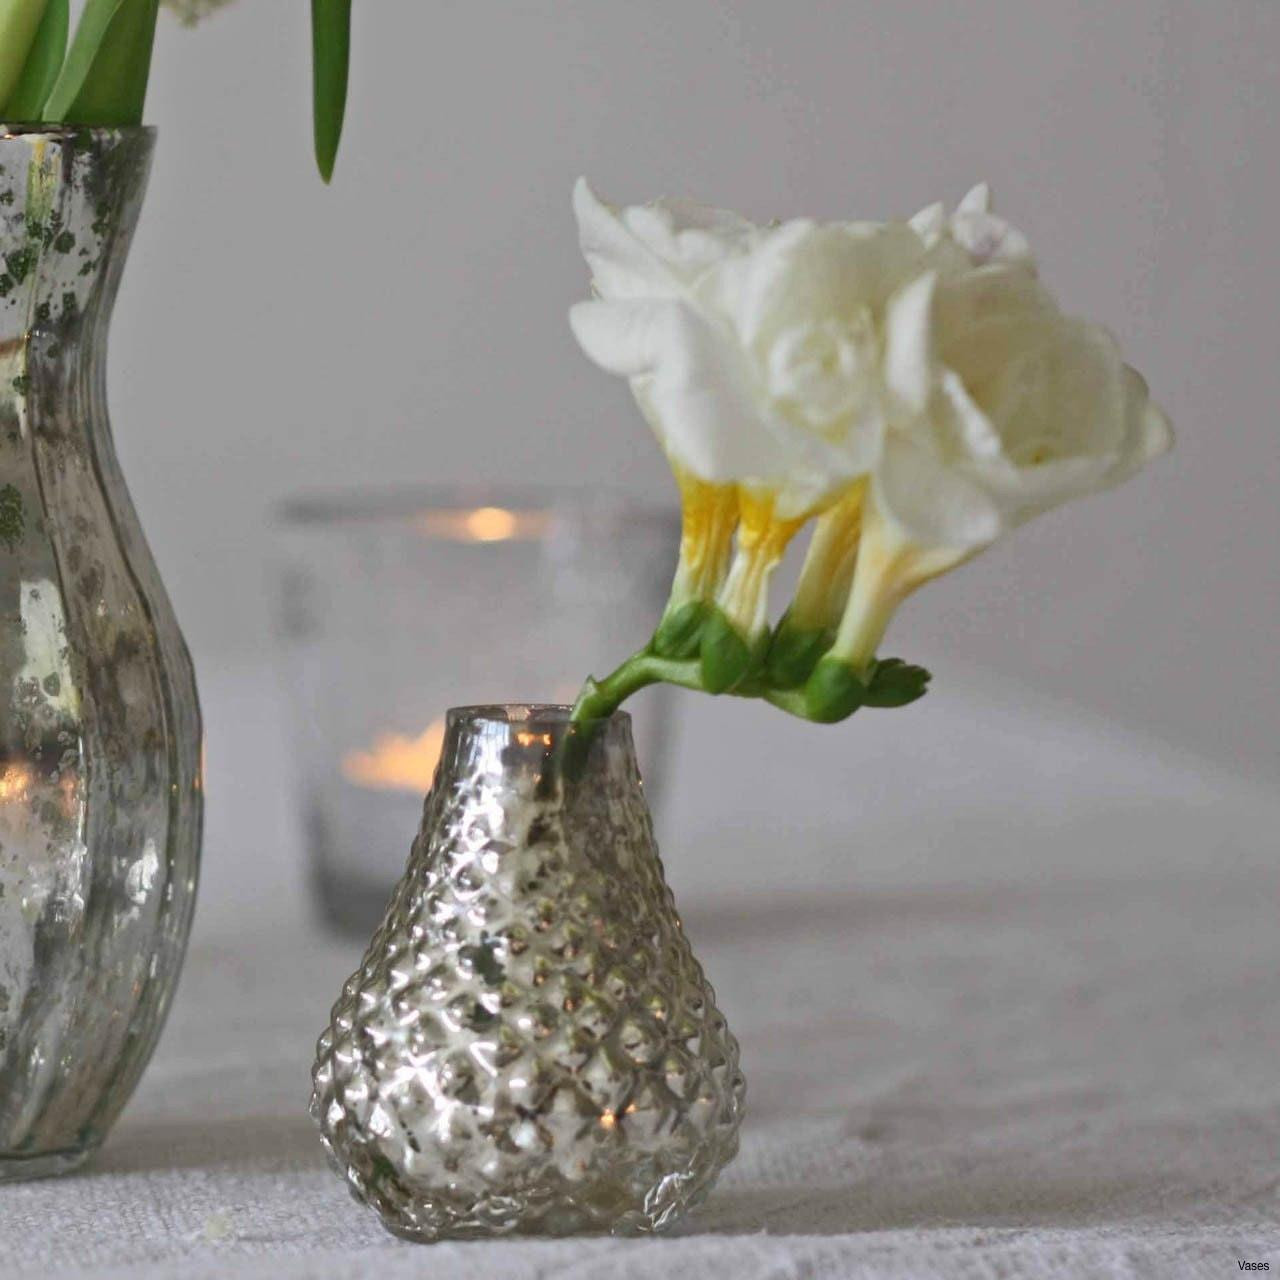 23 Best Small Clear Vases 2024 free download small clear vases of yard vases www topsimages com throughout diy yard decor beautiful jar flower vases bud wedding vase centerpiece idea i design of diy